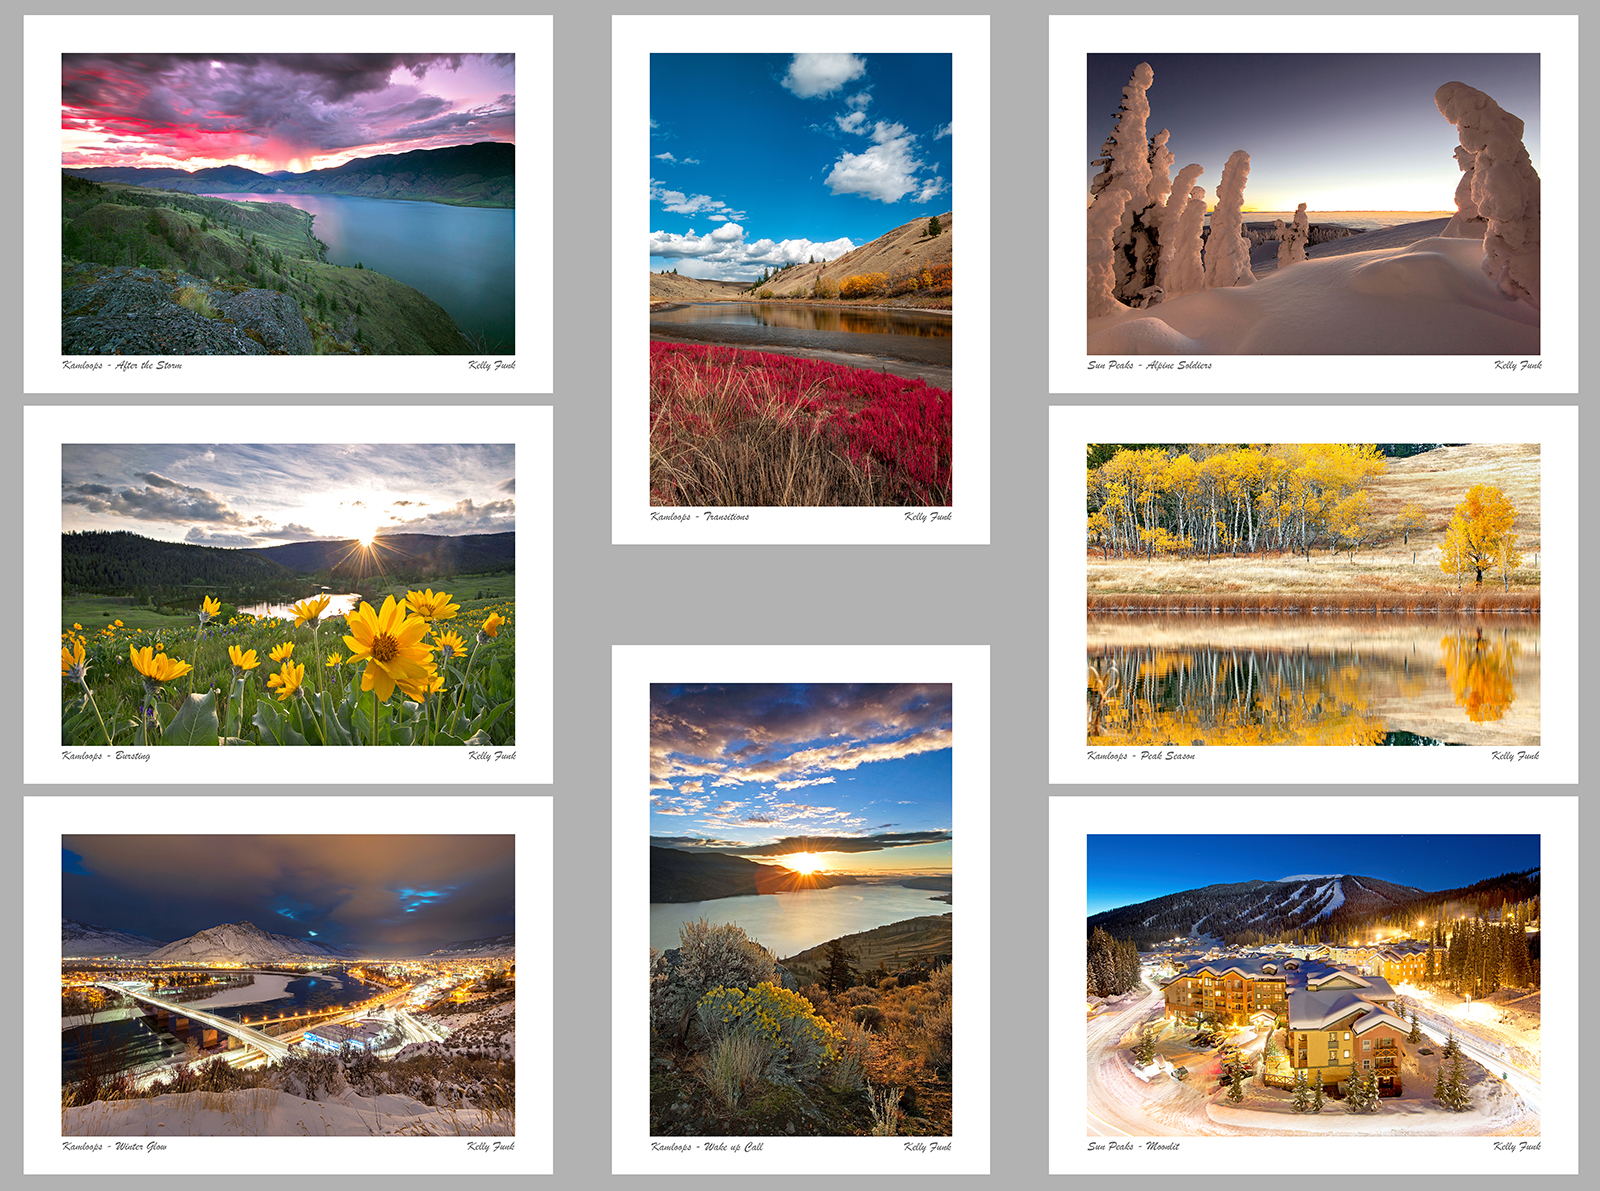 examples of corporate greeting cards from the Kamloops and Sun Peaks areas of BC, Canada